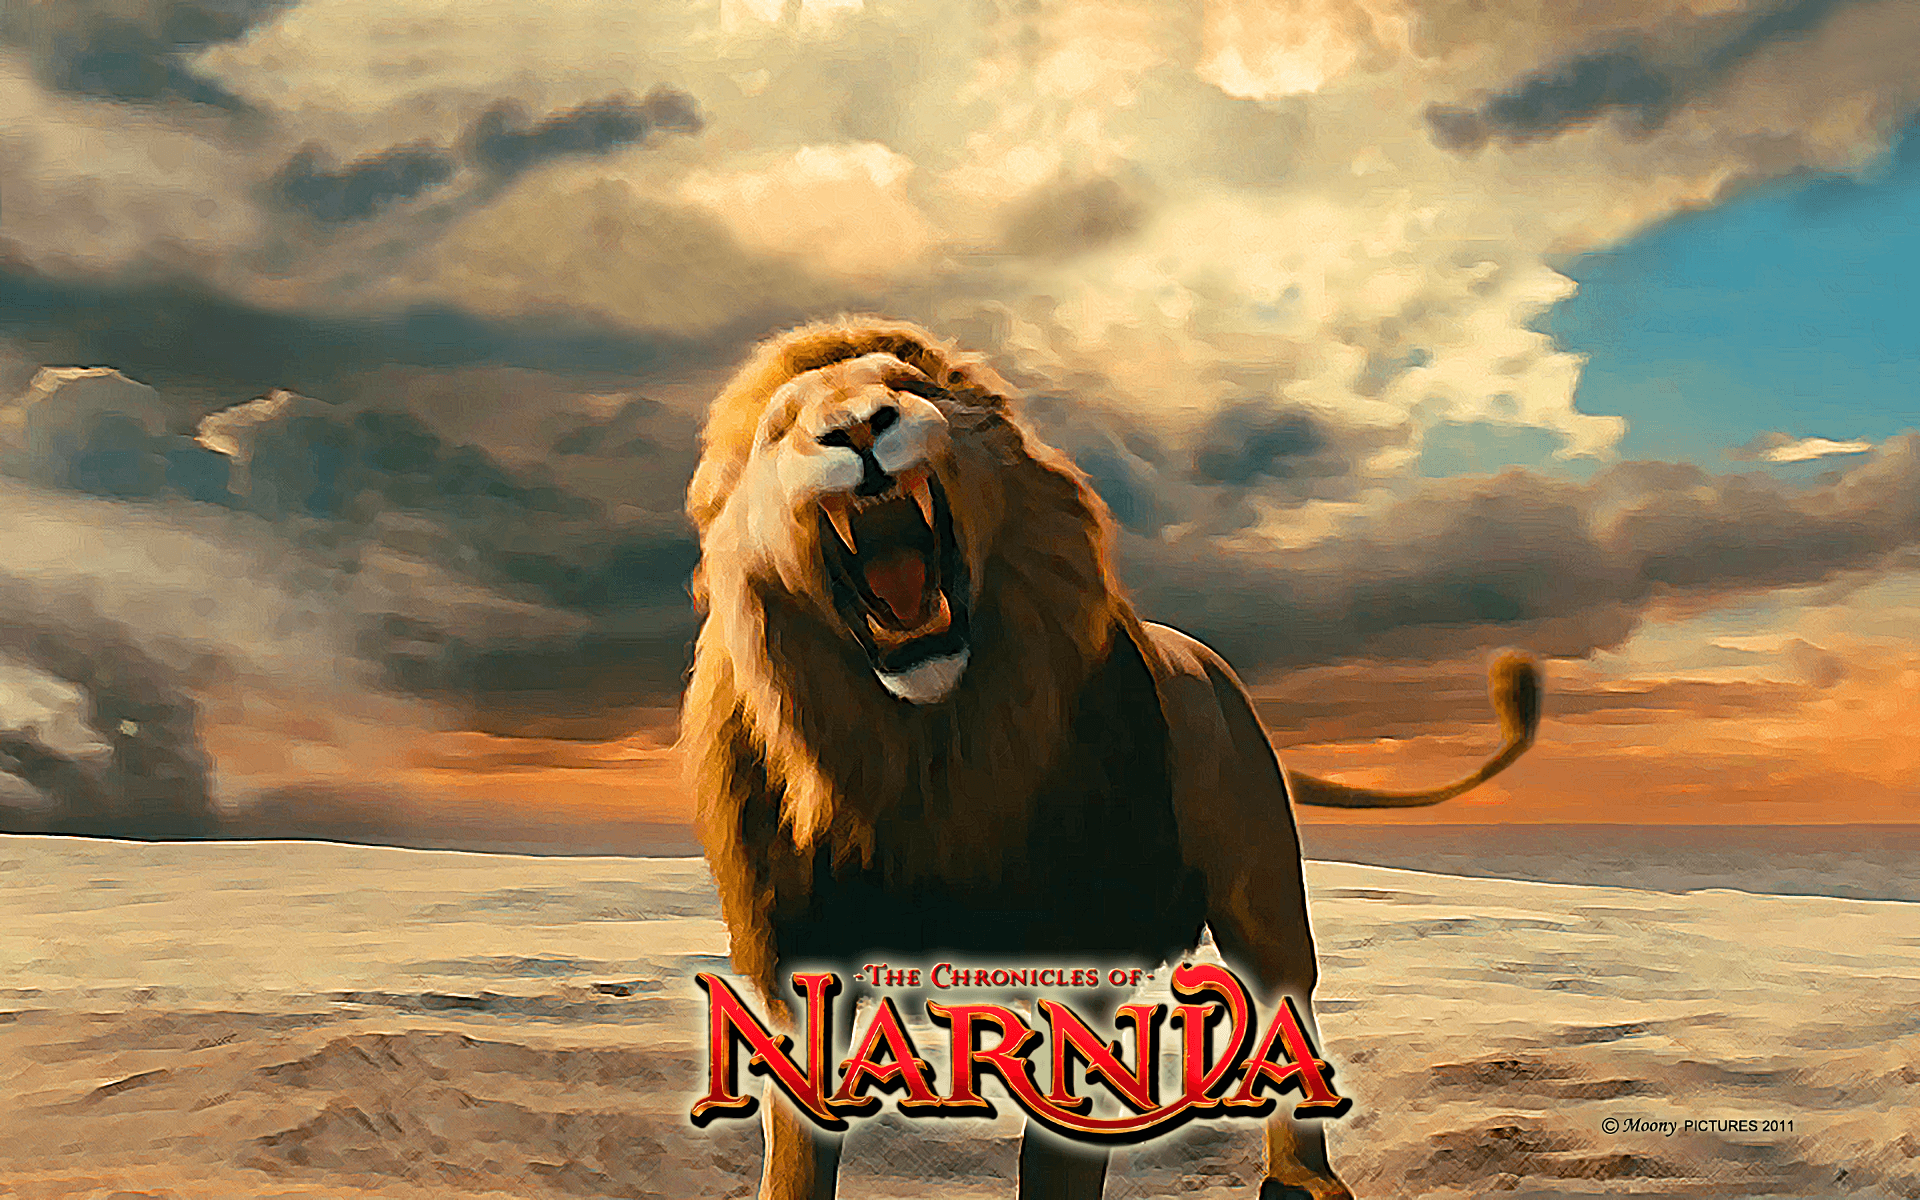 The Chronicles of Narnia: The Lion, the Witch and the Wardrobe HD